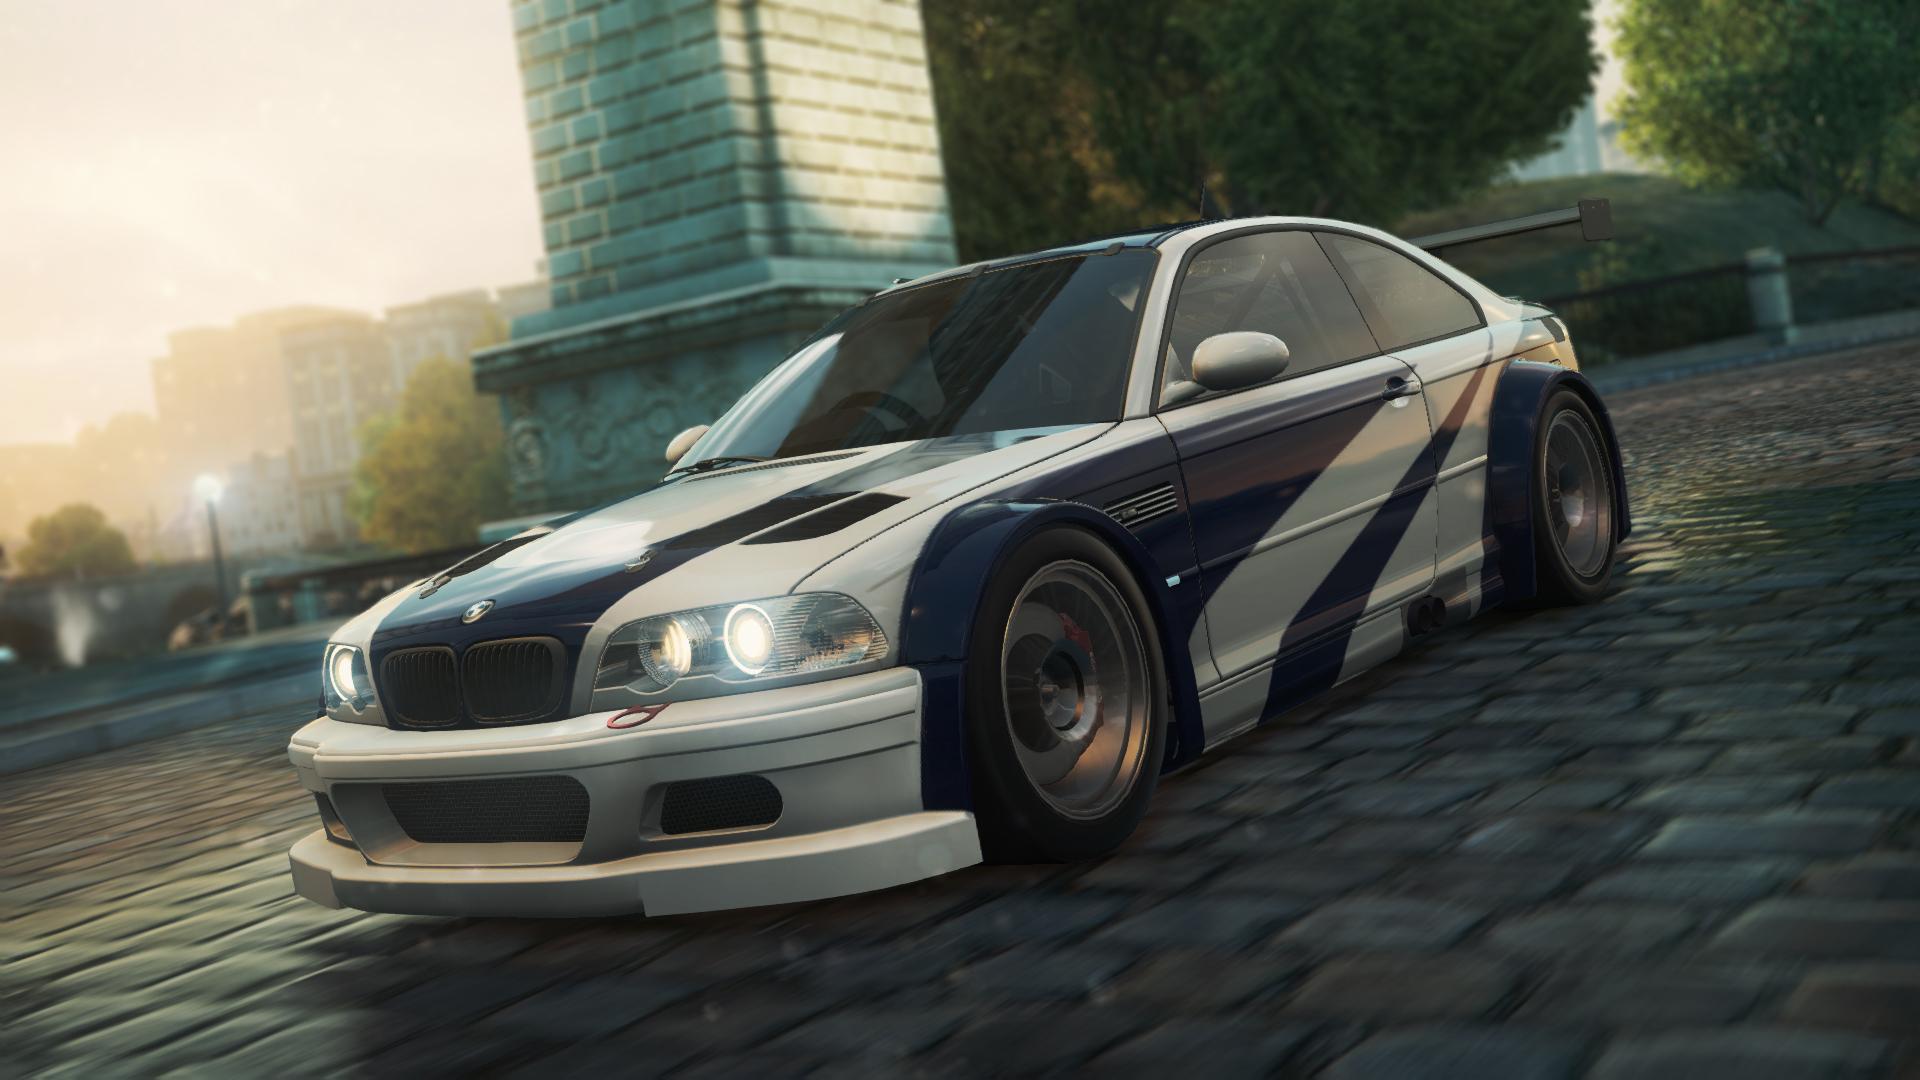 25+ Need For Speed Most Wanted Bmw M3 Gtr Wallpaper full HD